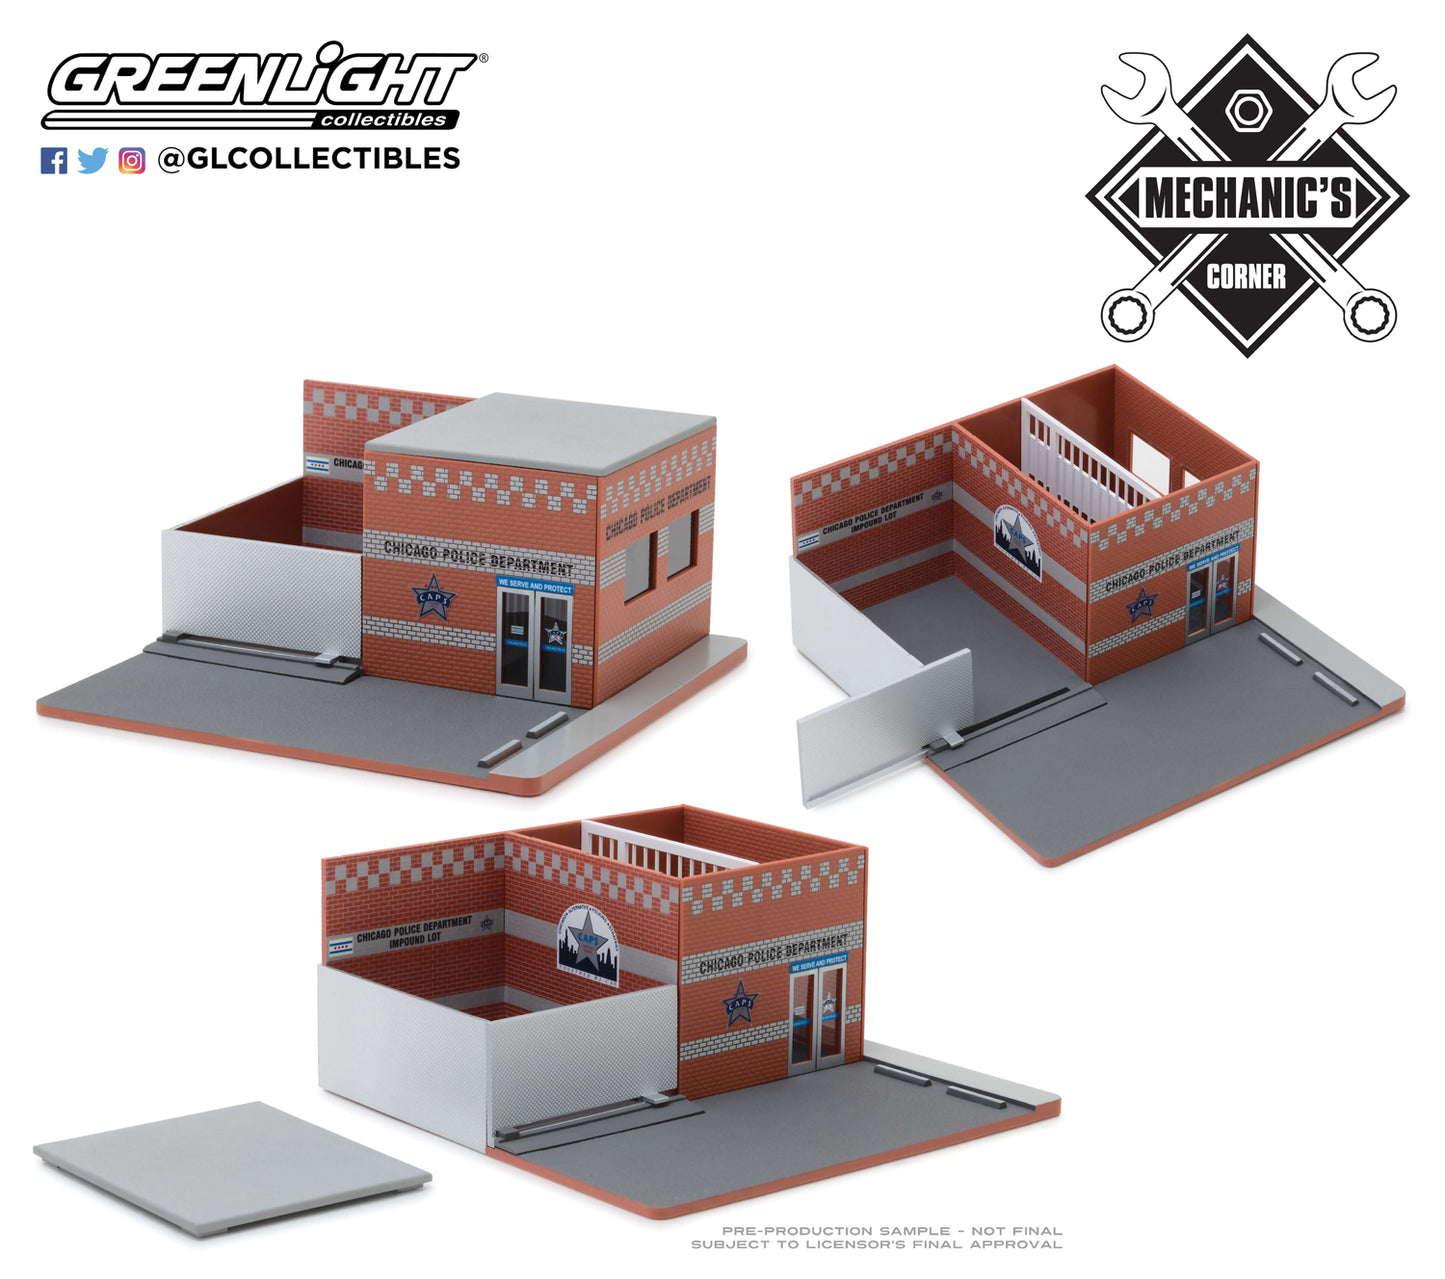 GreenLight 1/64 Mechanic s Corner Series 4 - Hot Pursuit Central Command - City of Chicago Police Department (CPD) 57041